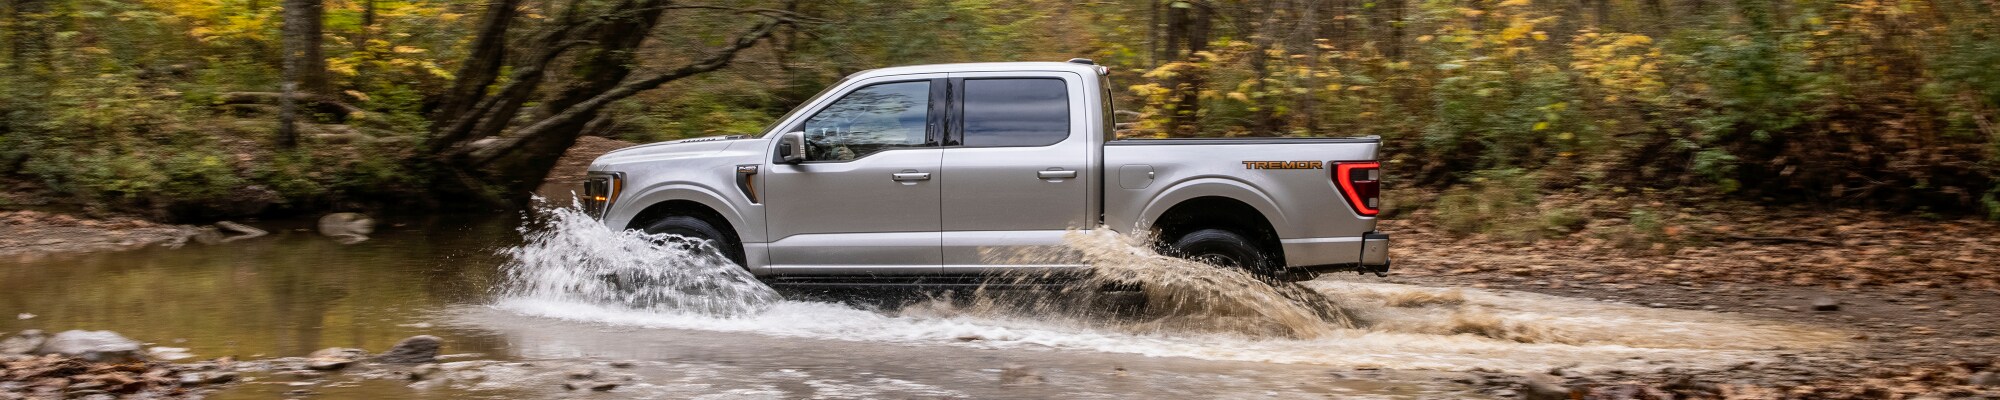 New Ford F-150 driving through water